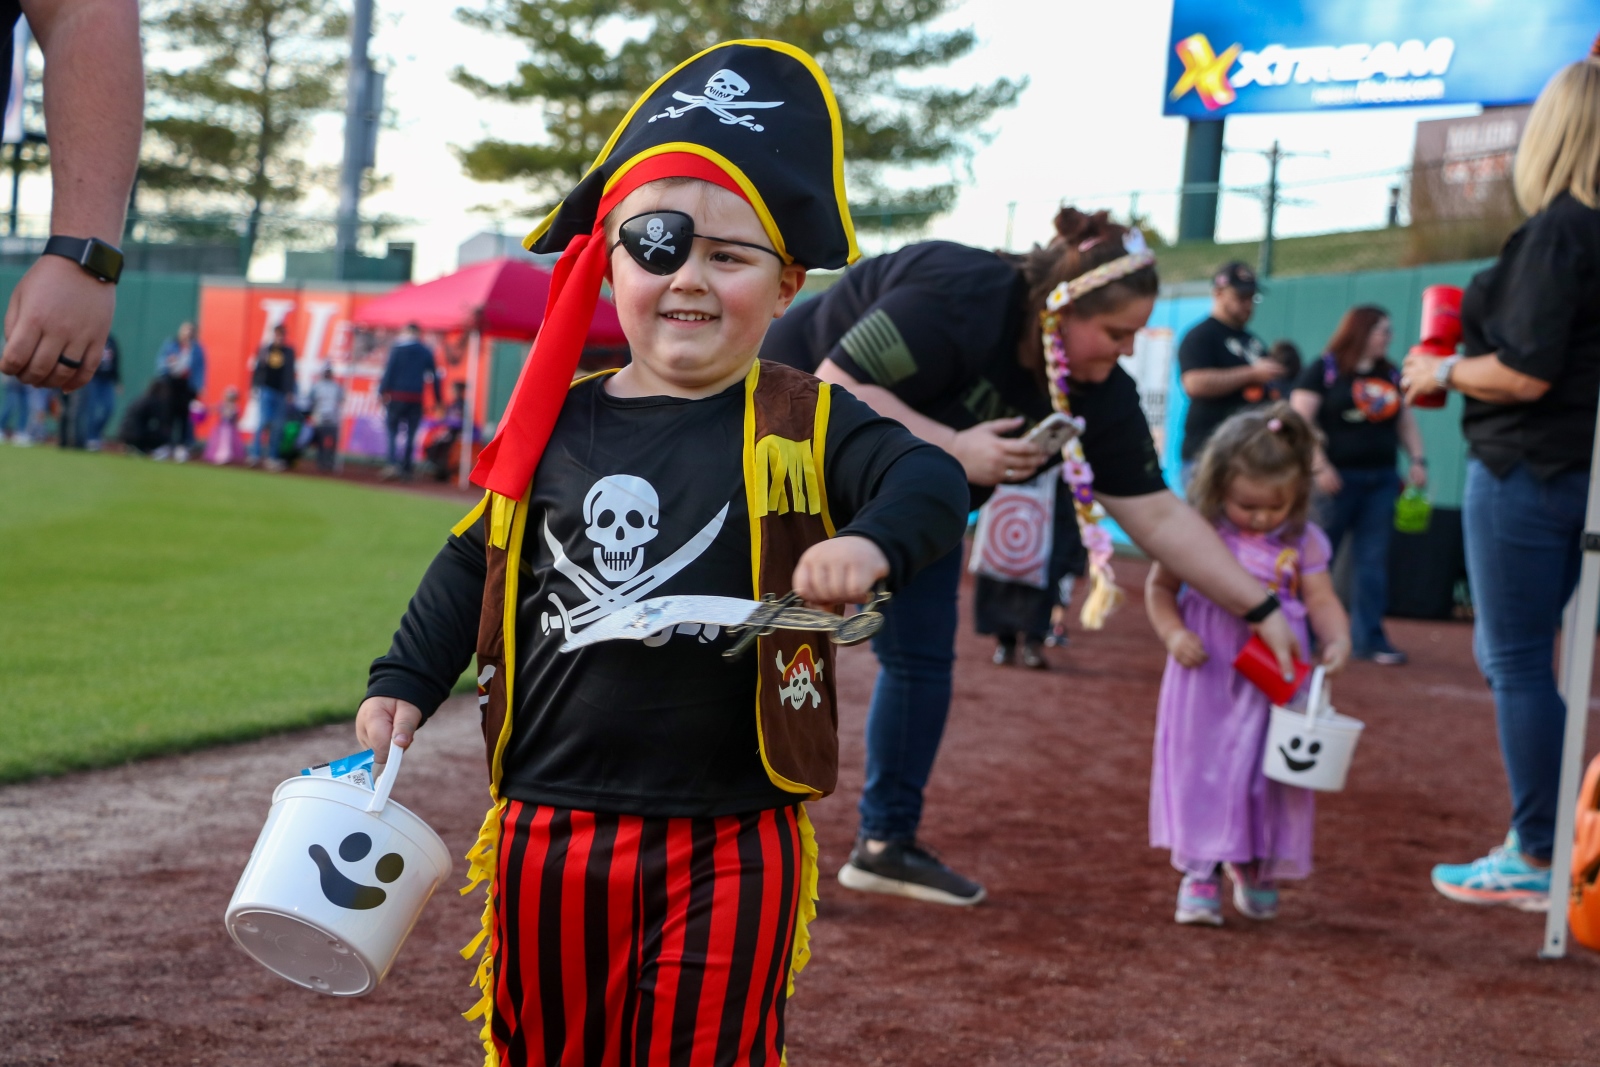 A young boy in a pirate costume